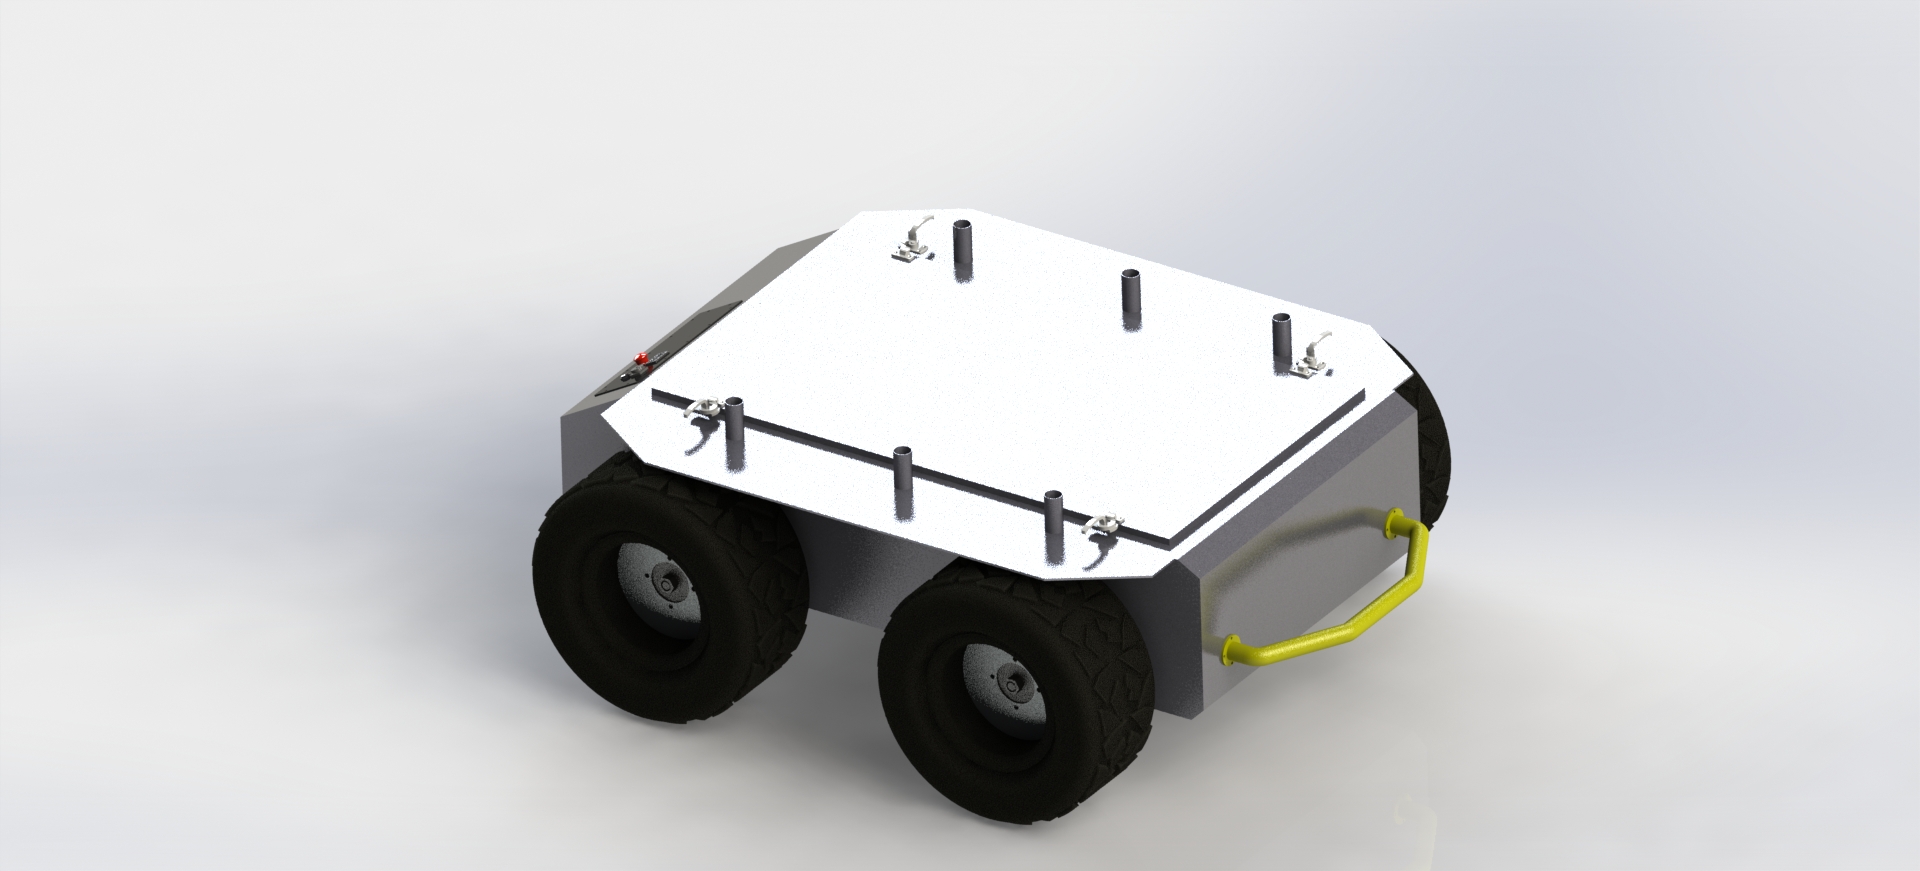 W1500 Wheeled robot chassis